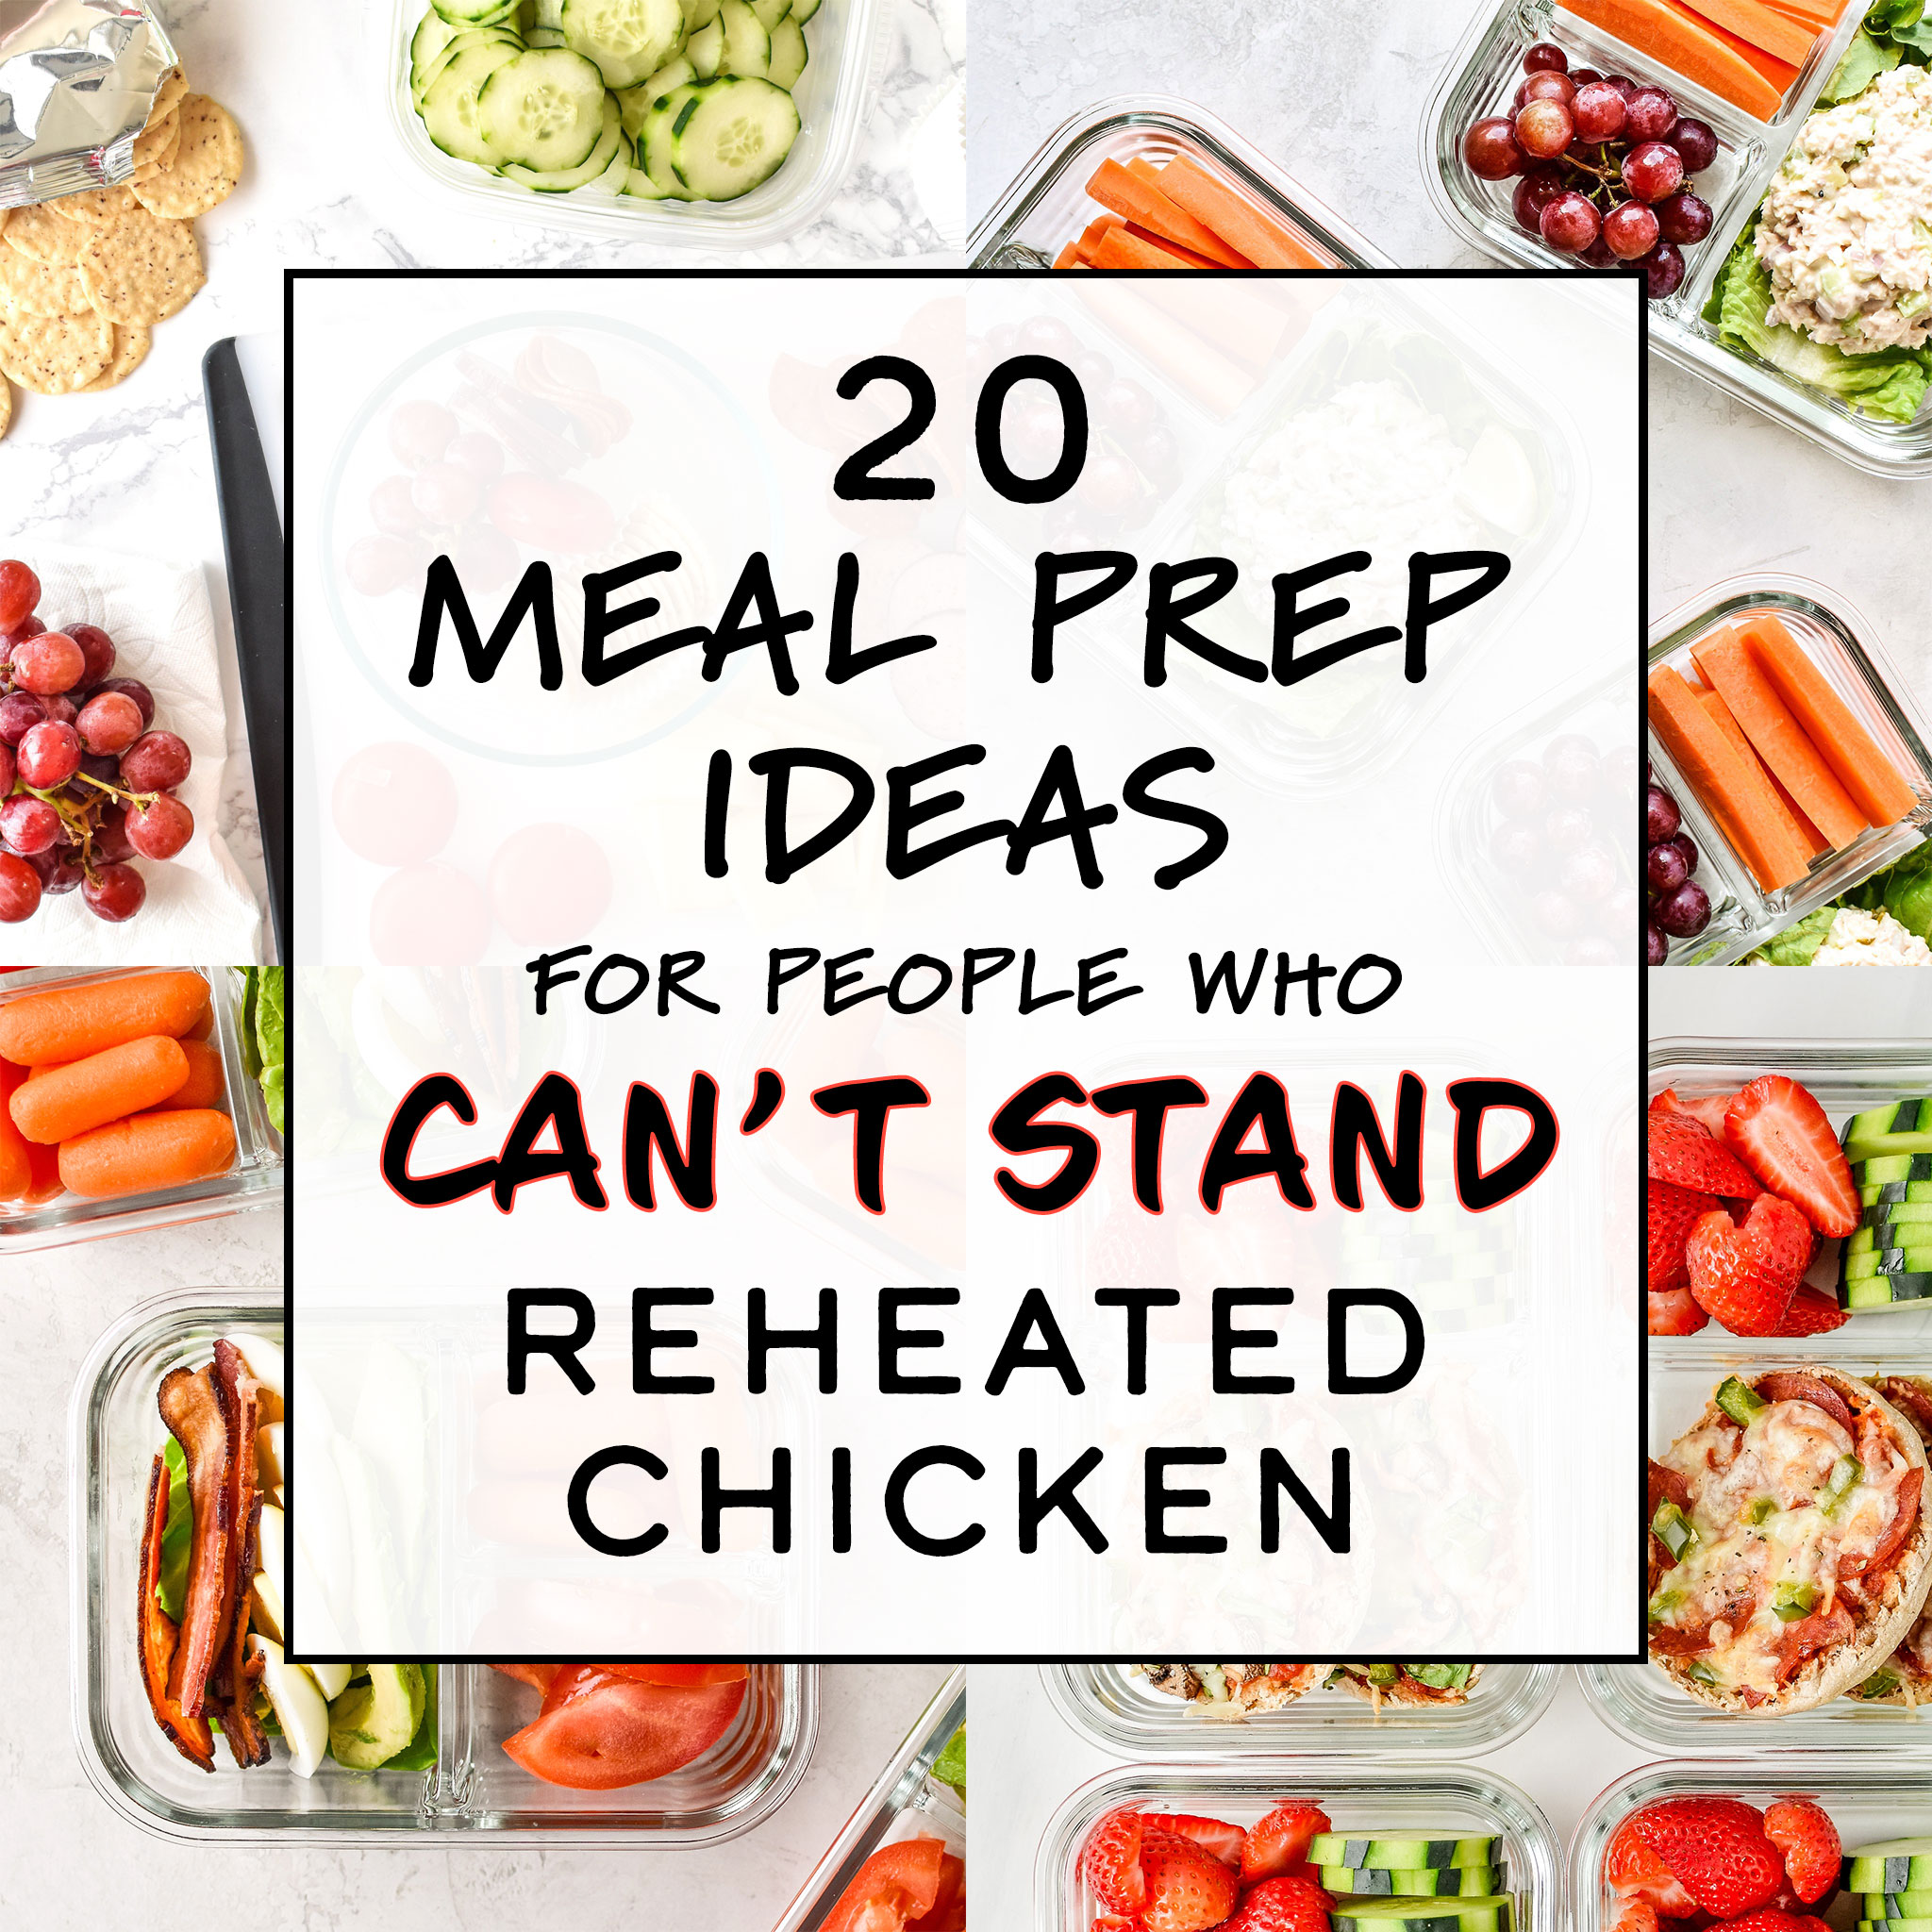 Cover photo collage for the post 20 Meal Prep Ideas for People Who Can't Stand Reheated Chicken